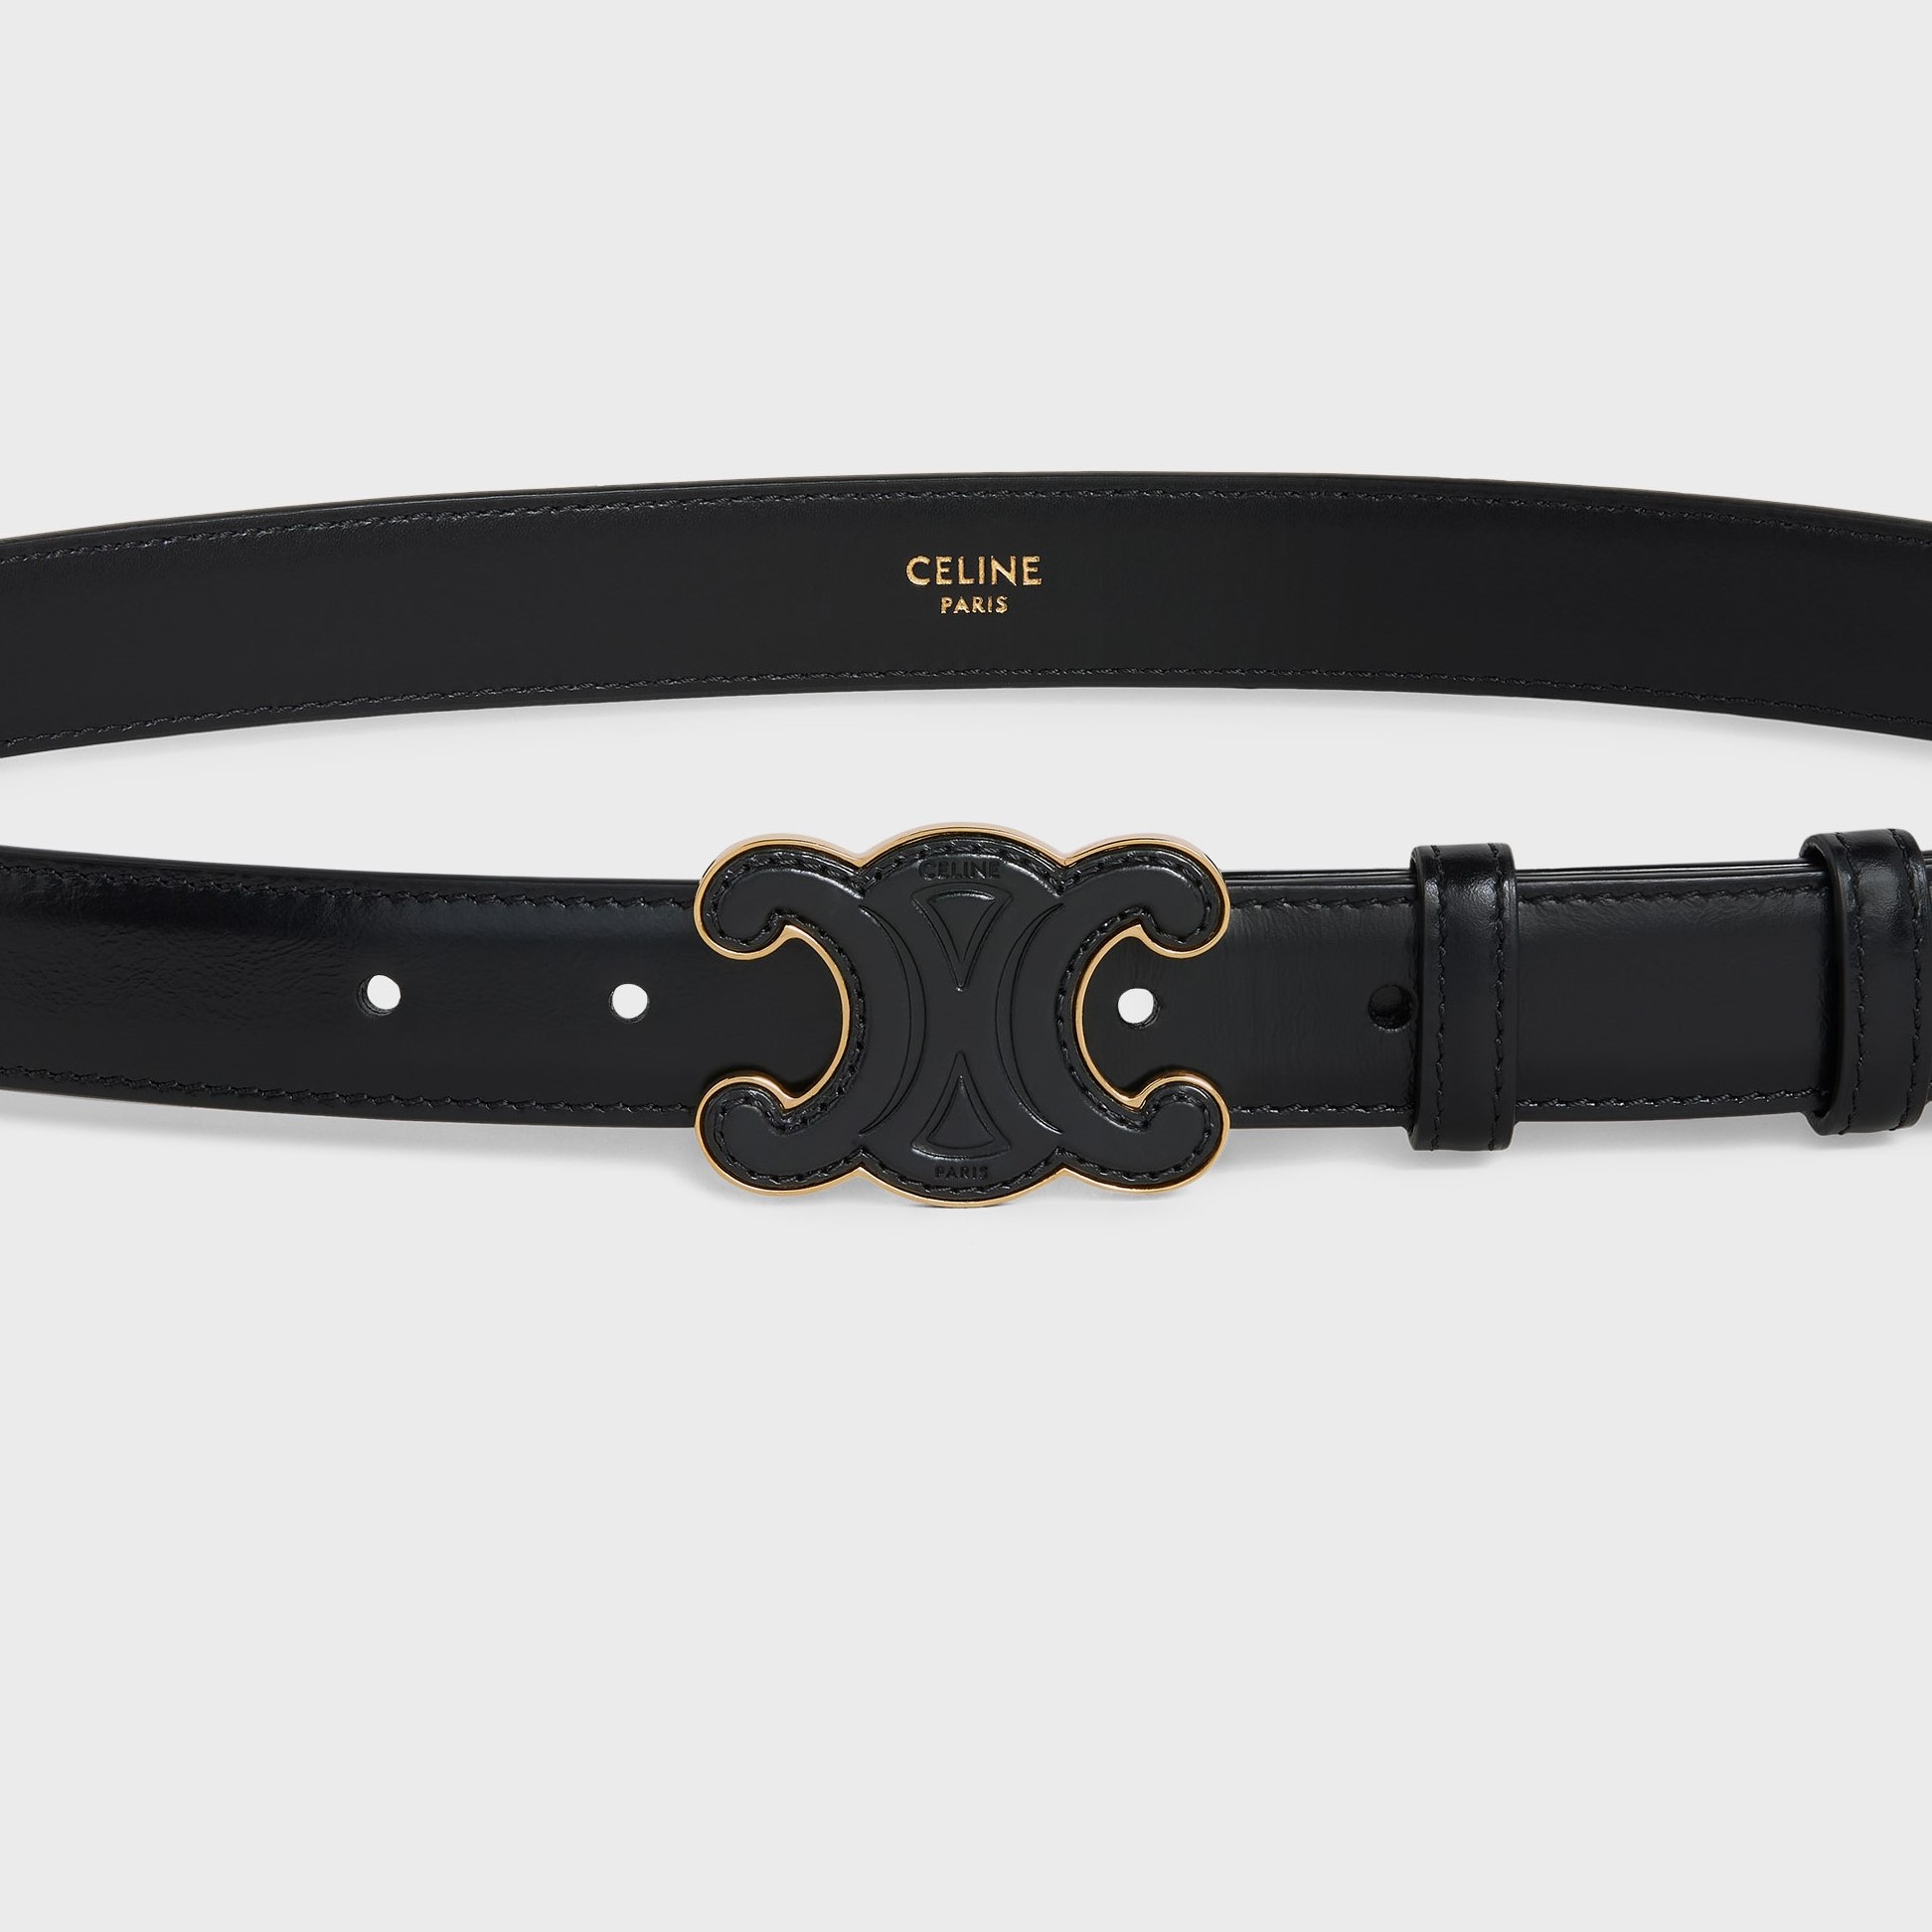 THẮT LƯNG NỮ CELINE MEDIUM CUIR TRIOMPHE BUCKLE WITH COLLAR STUD BELT IN BLACK TAURILLON LEATHER 1